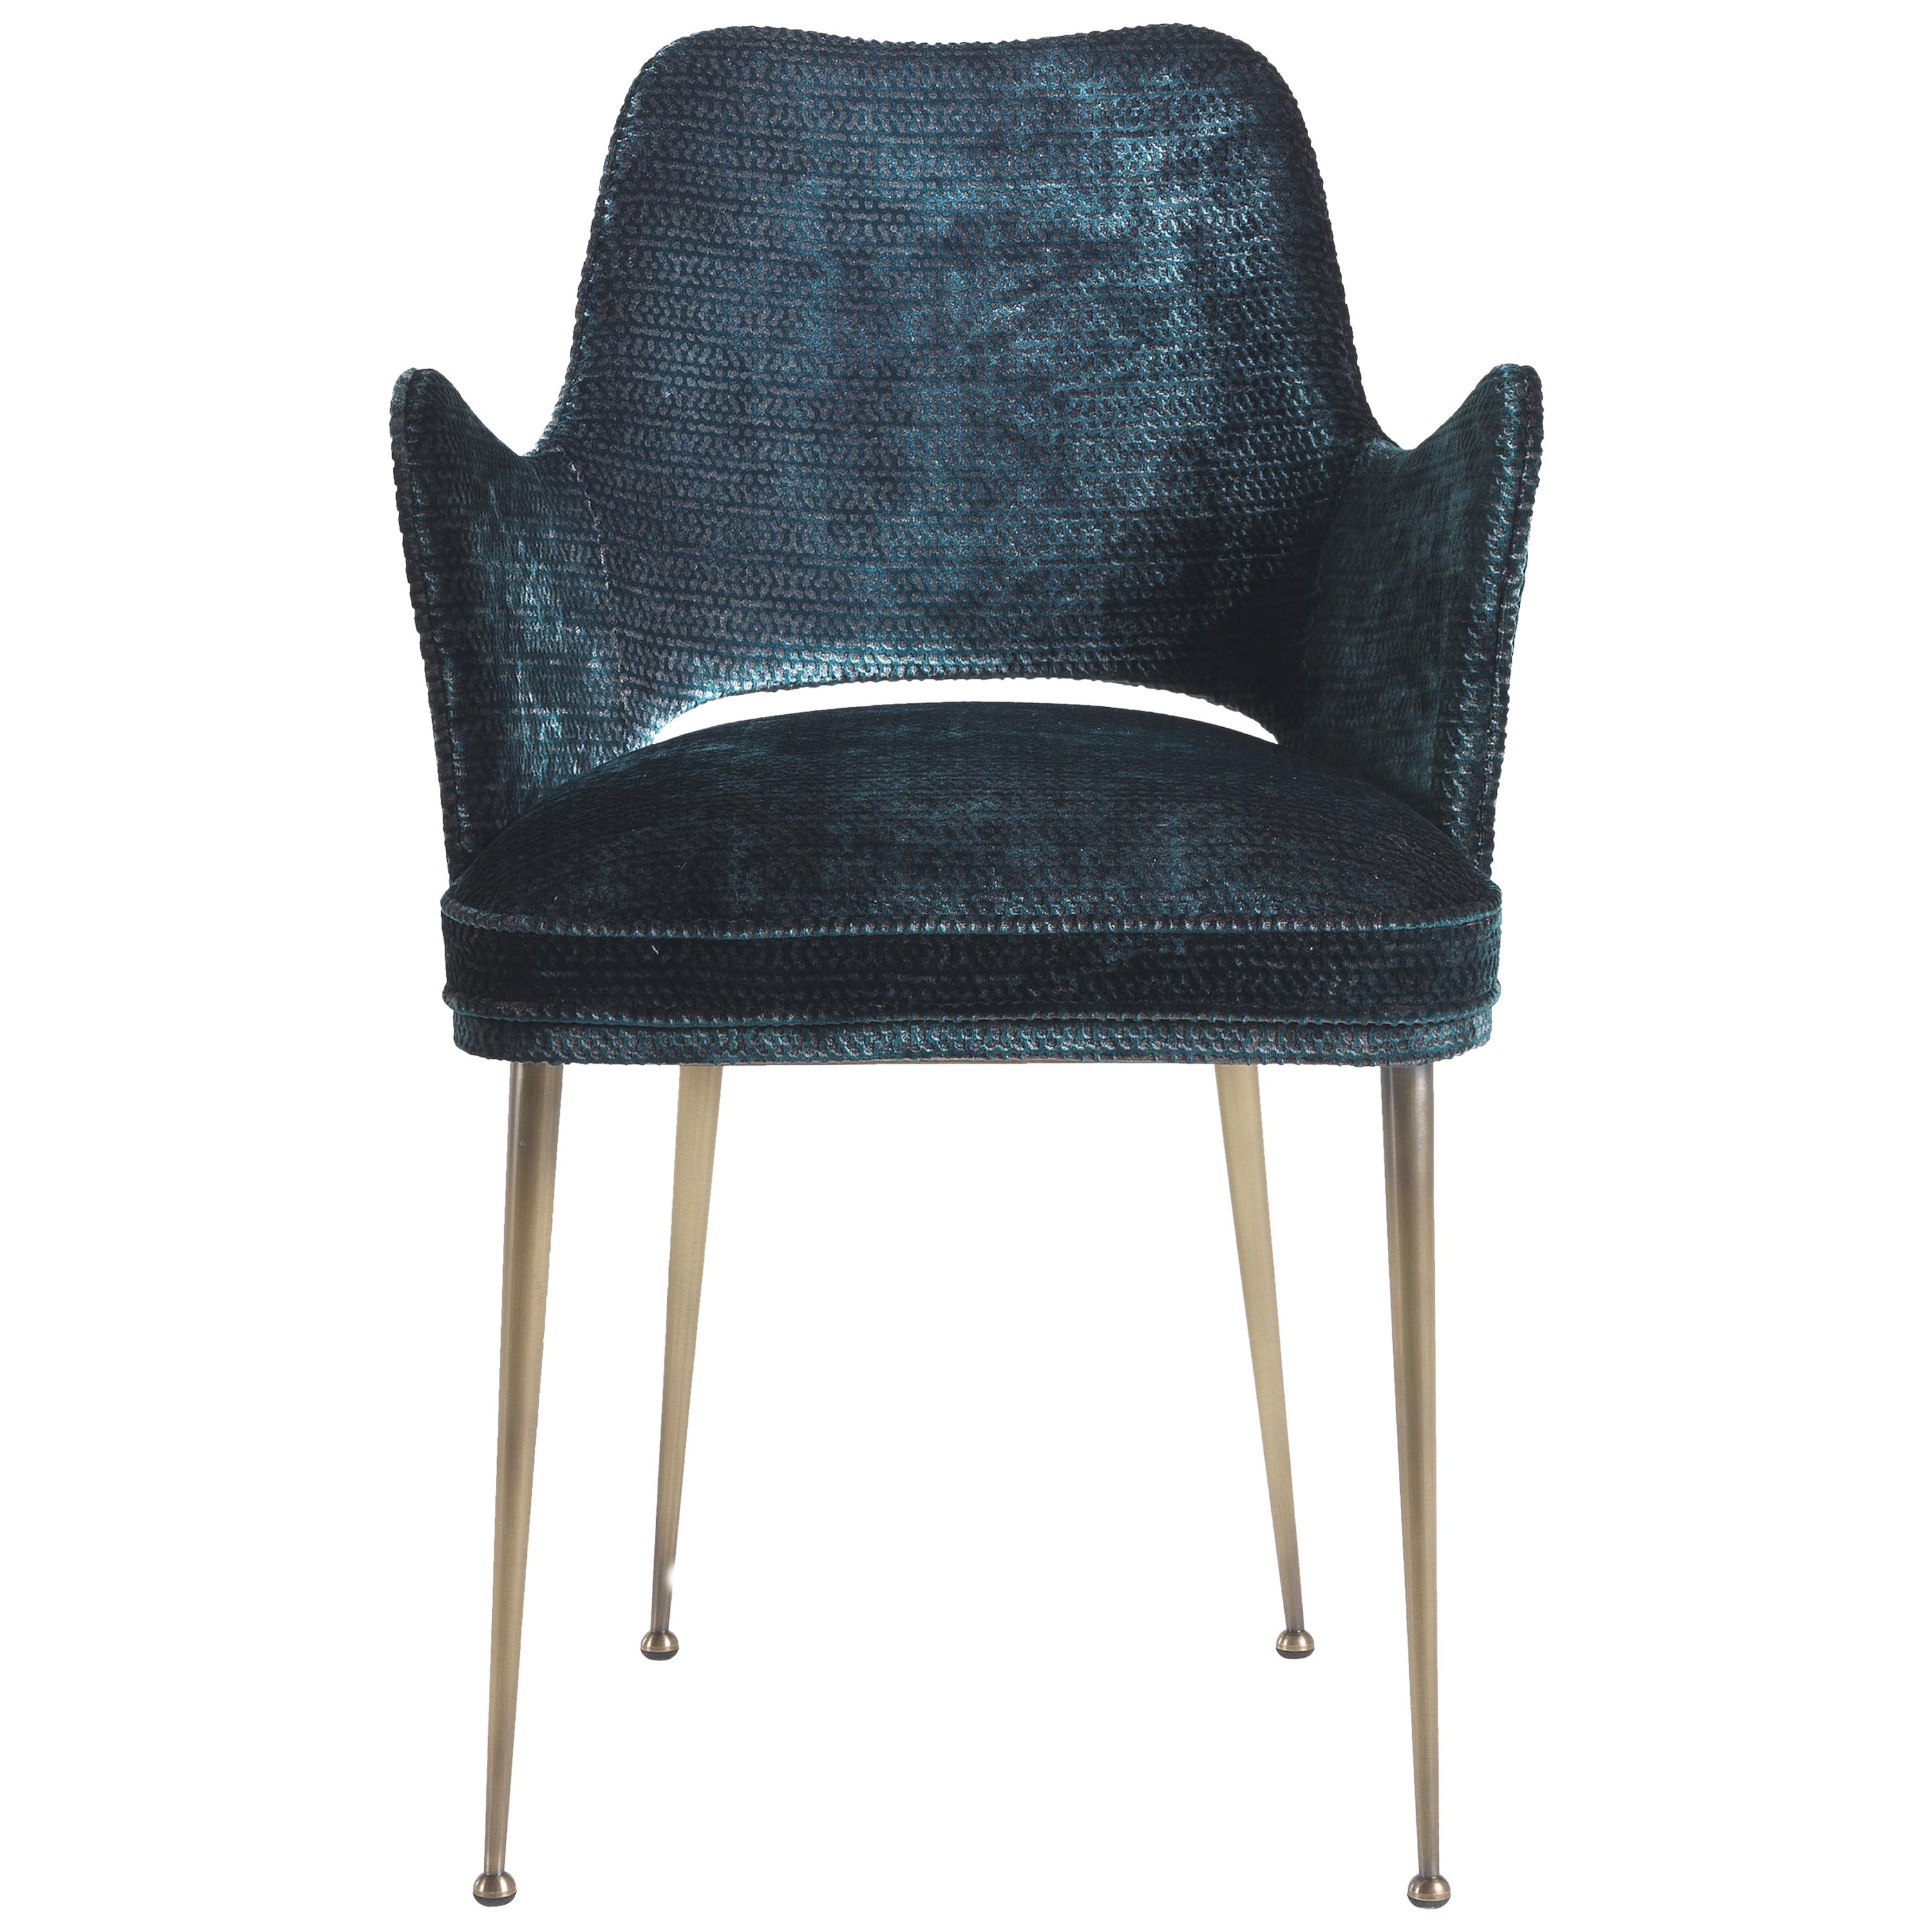 Gianfranco Ferre McAdam Chair in Blue Fabric with Bronzed Brass Legs For Sale